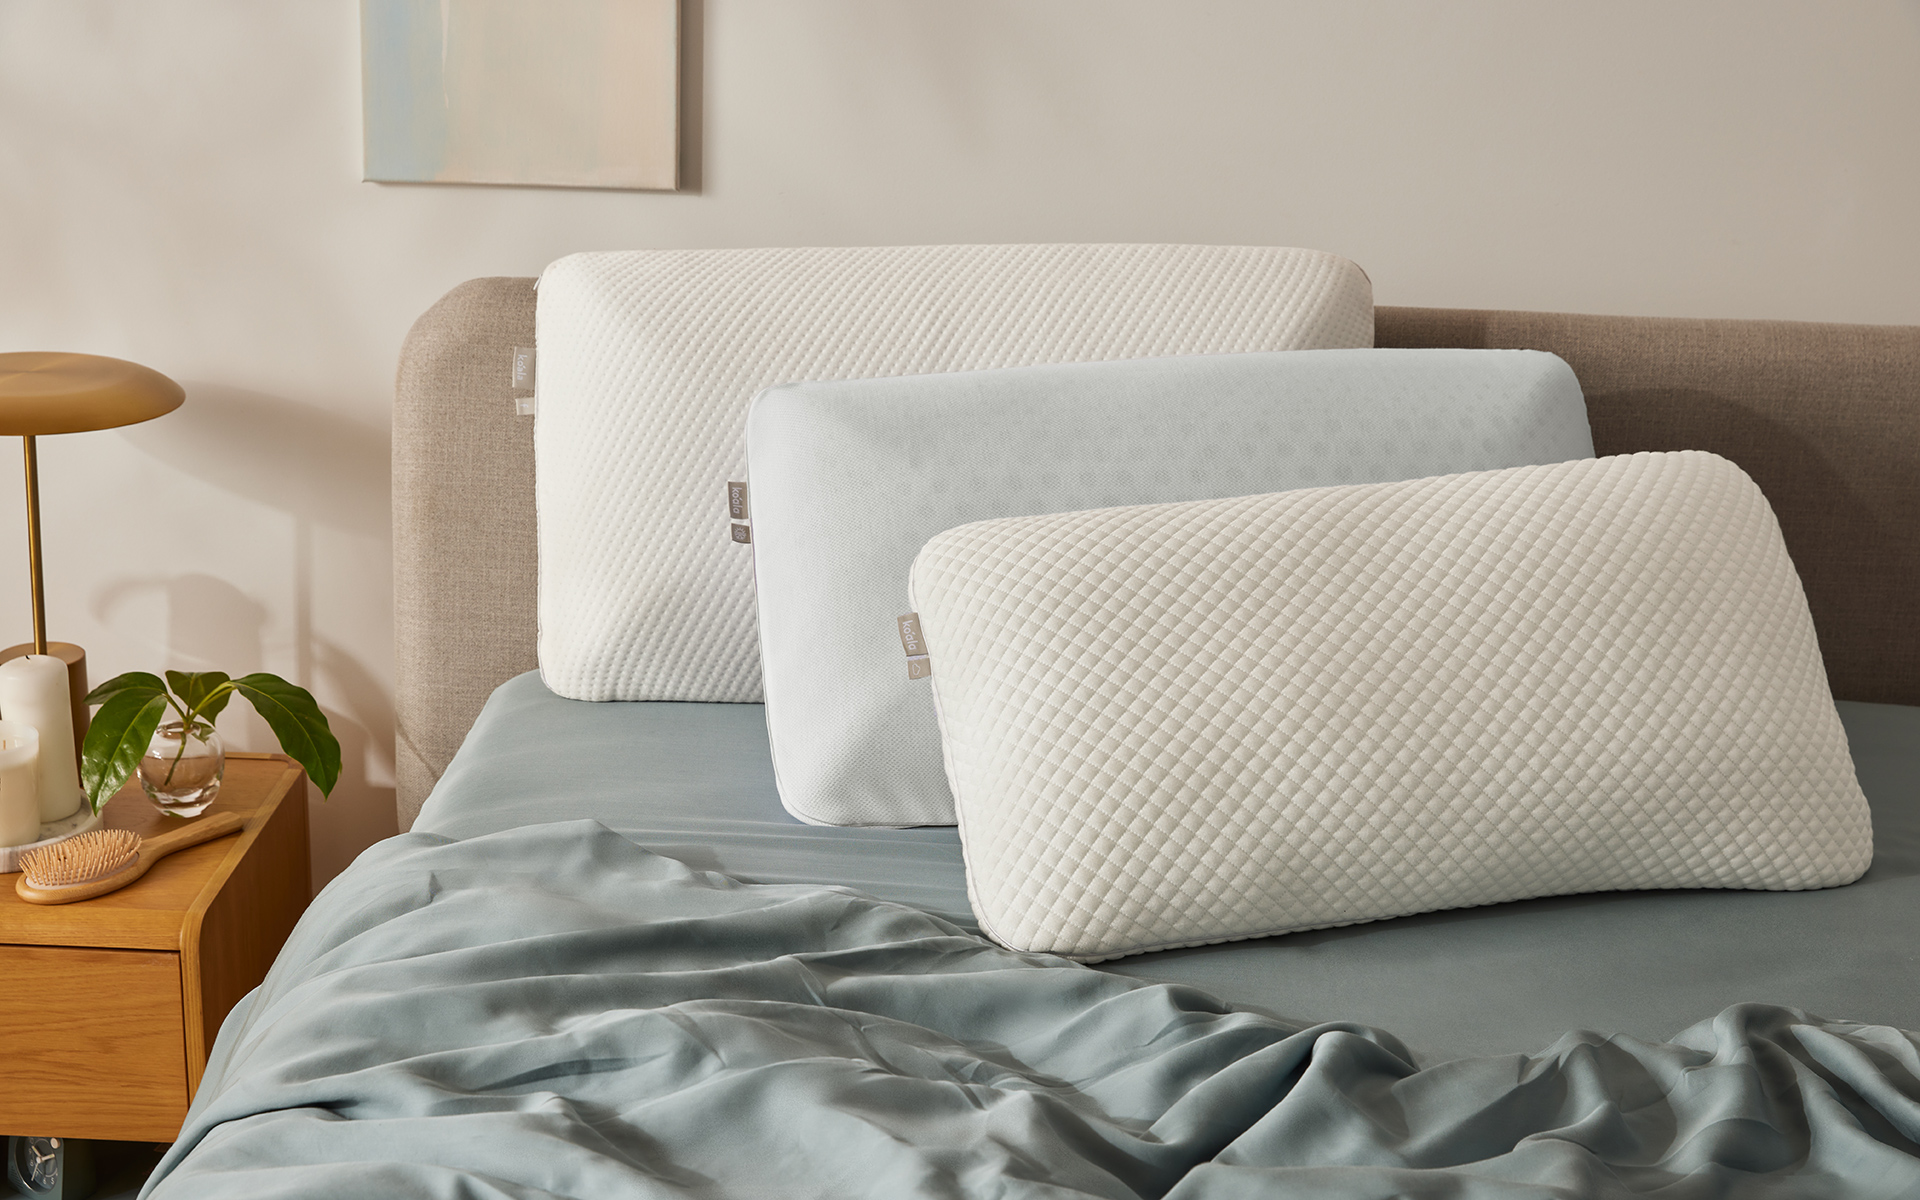 For sleepers searching for the best pillow for a sore neck, these three Koala pillows, pictured on a bed with Koala Tencel sheets, are a great choice